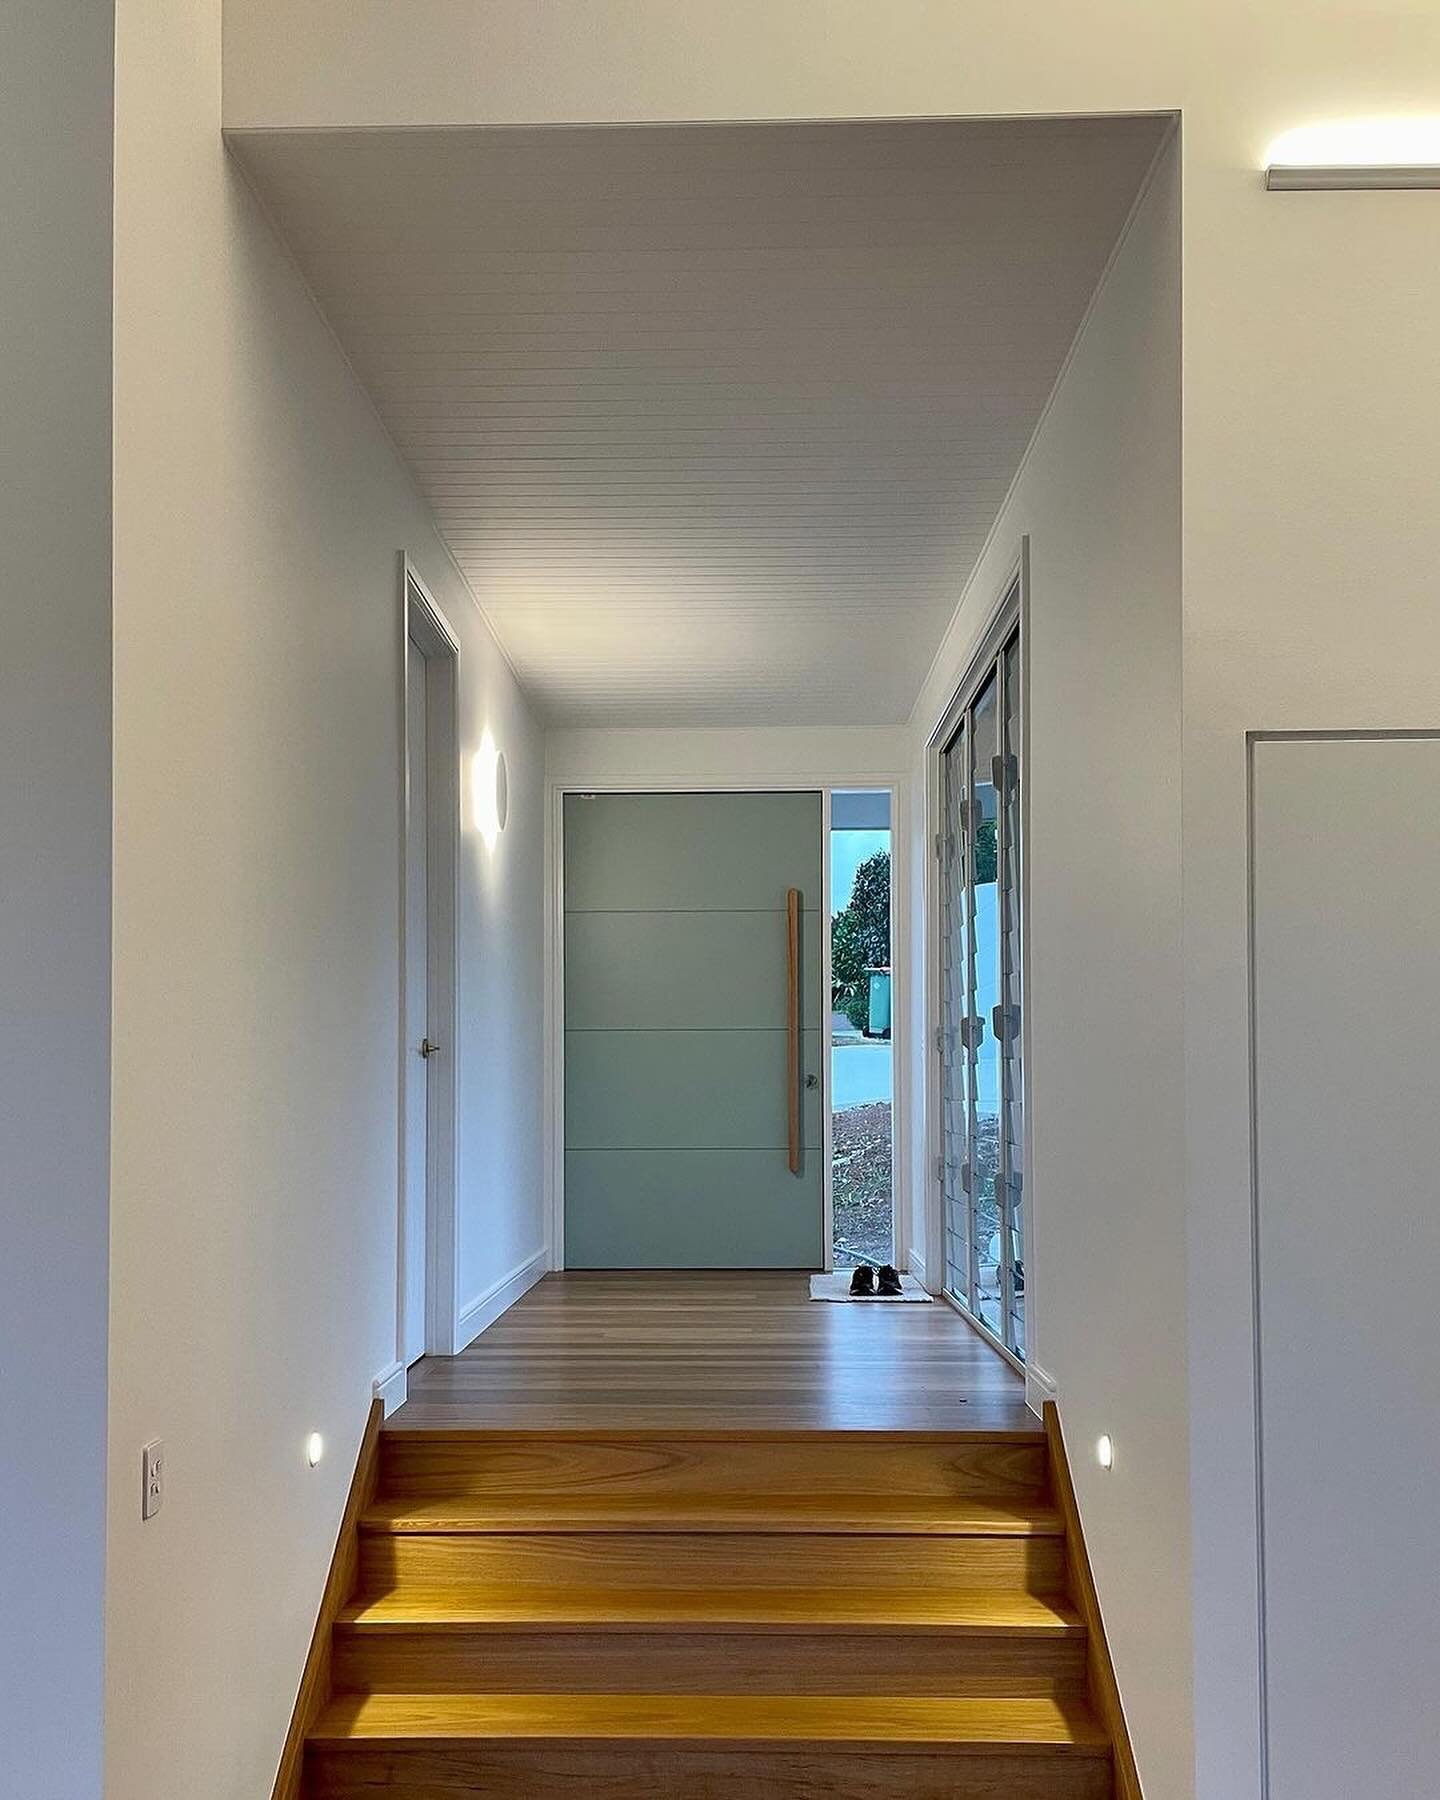 This beautifully designed home is the result of the hard work and dedication of the homeowners, who came to MINT for a consultation.

Throughout the process we discussed potential lighting design elements in detail and explained why we make our recom